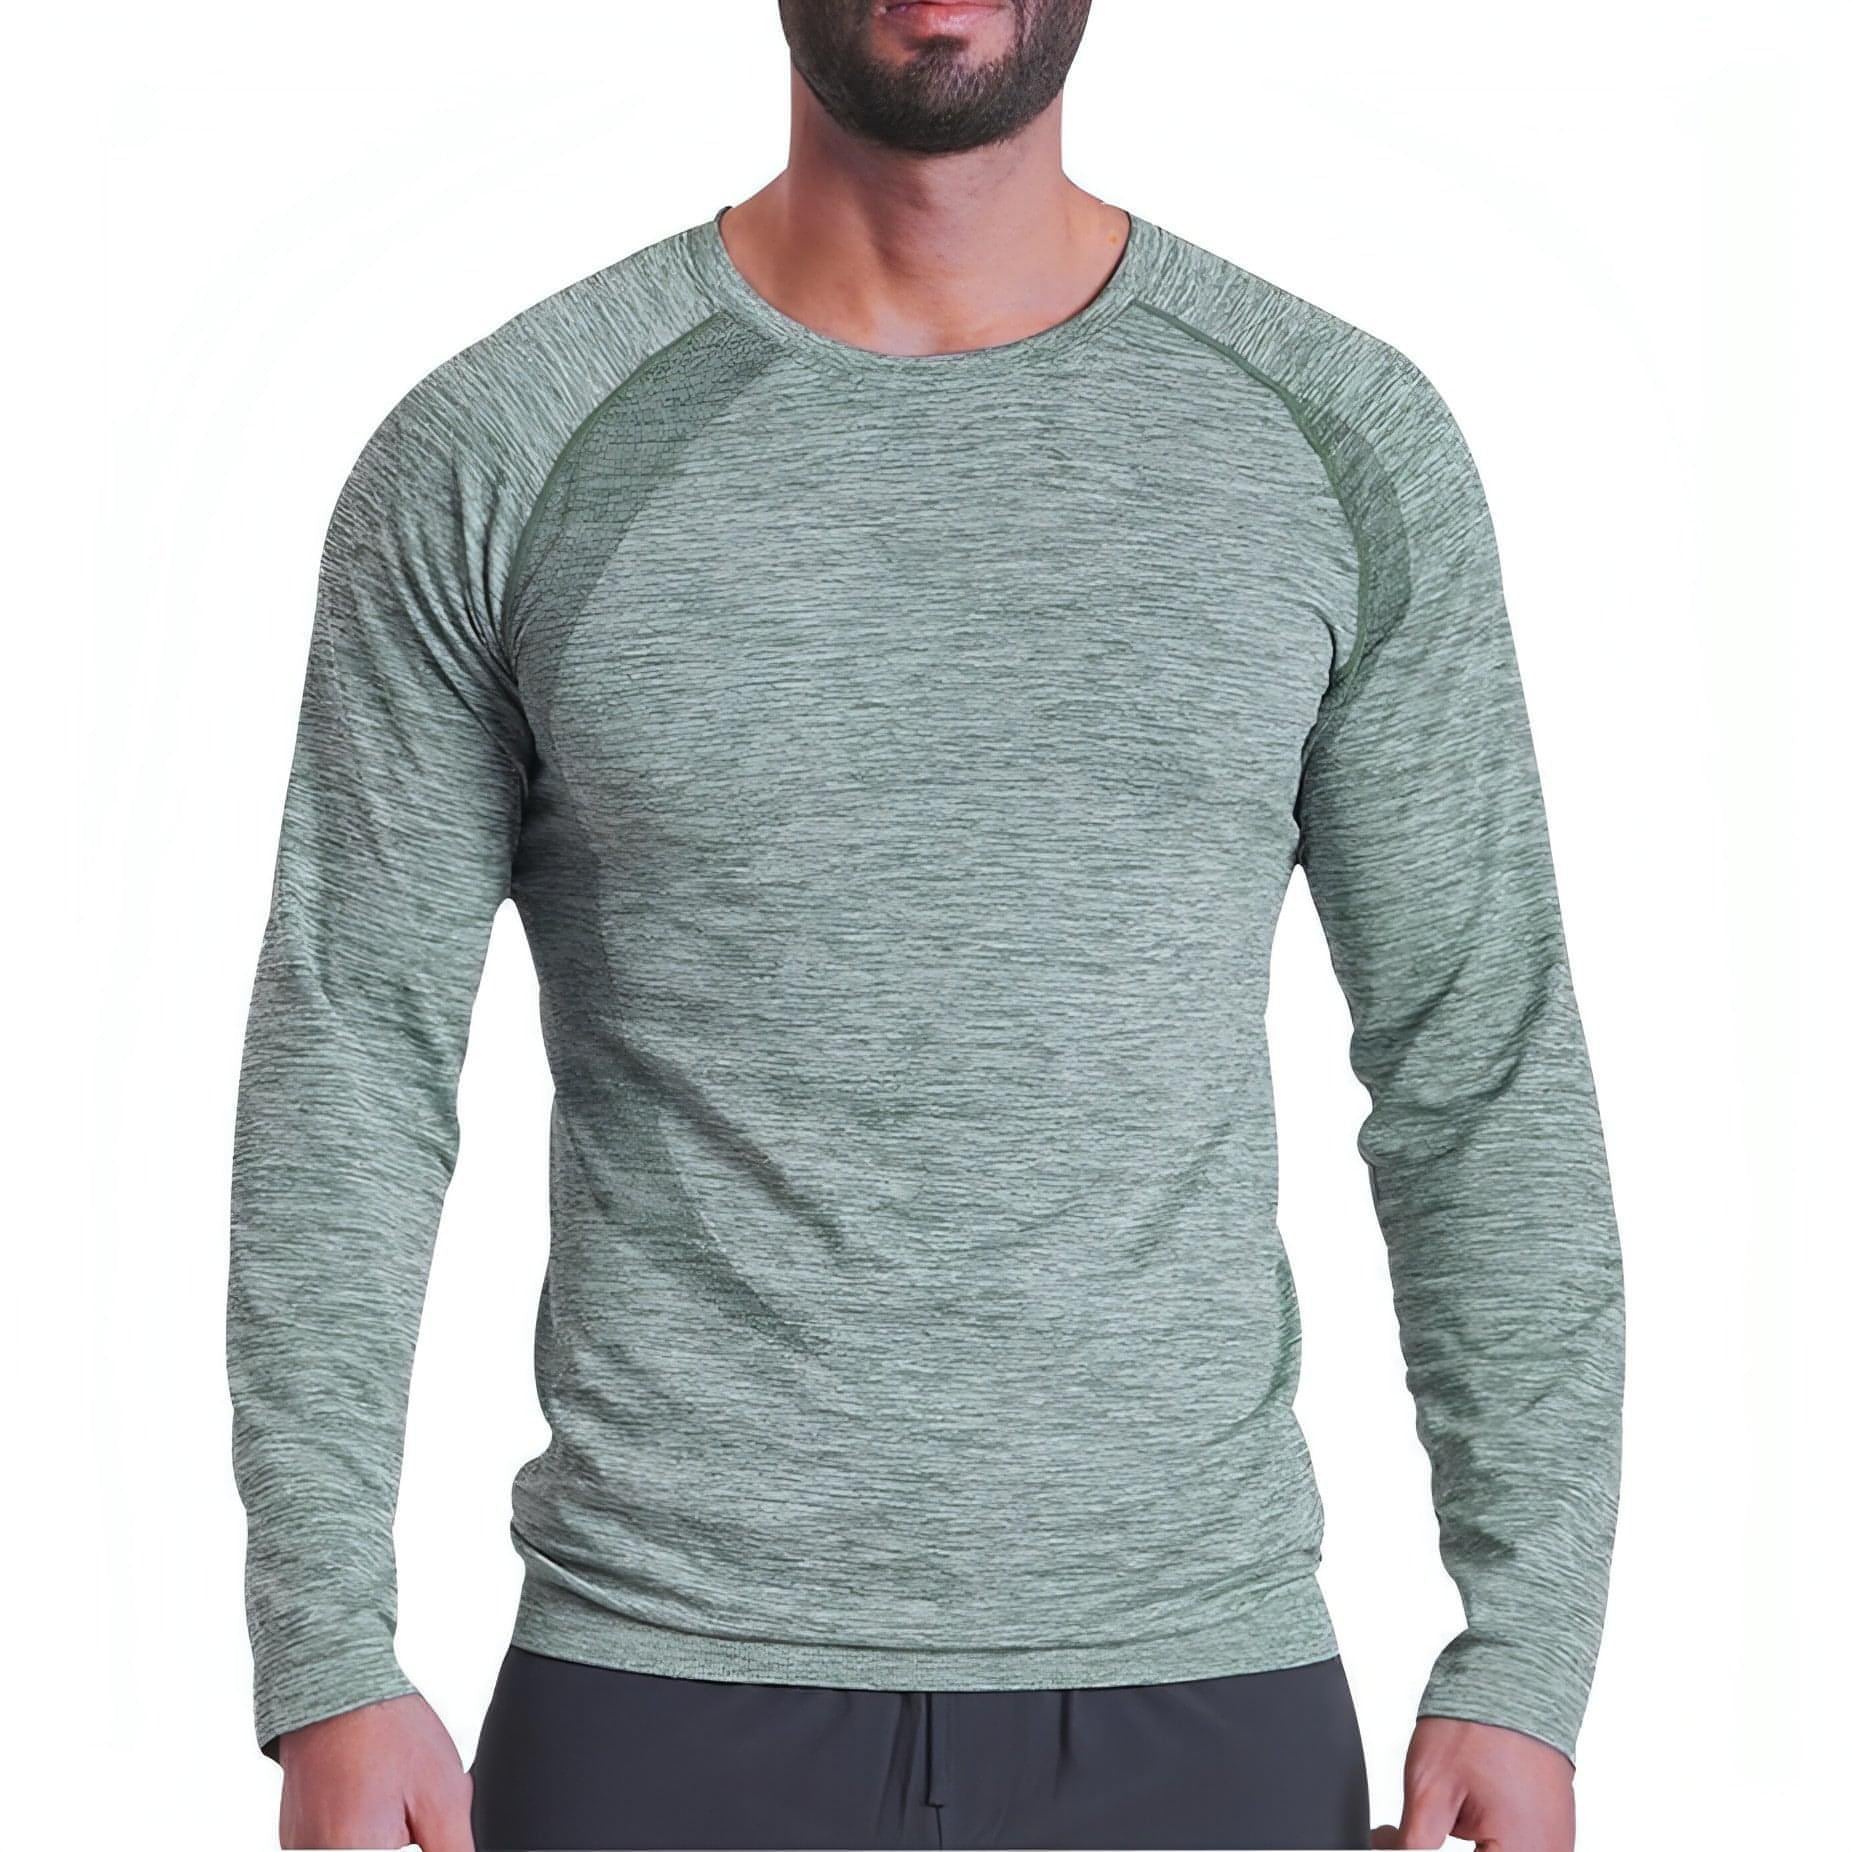 Ohmme Orion Long Sleeve Mens Yoga Top - Green - Start Fitness